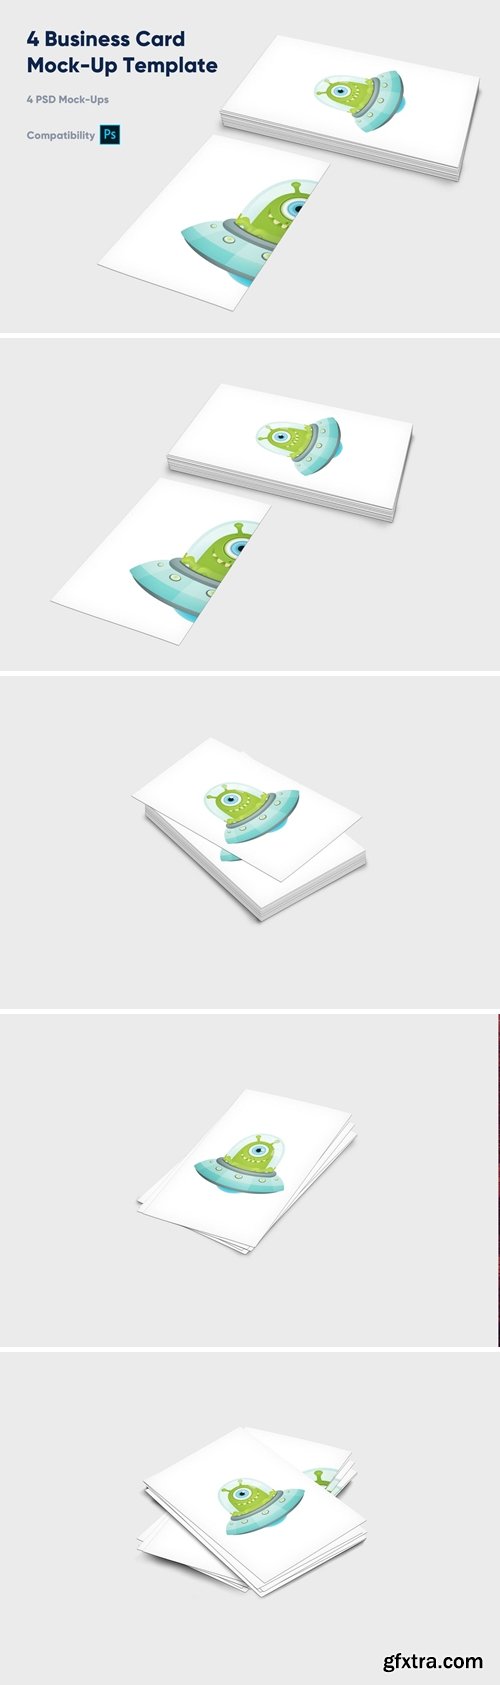 4 Business Card Mock-Up Template